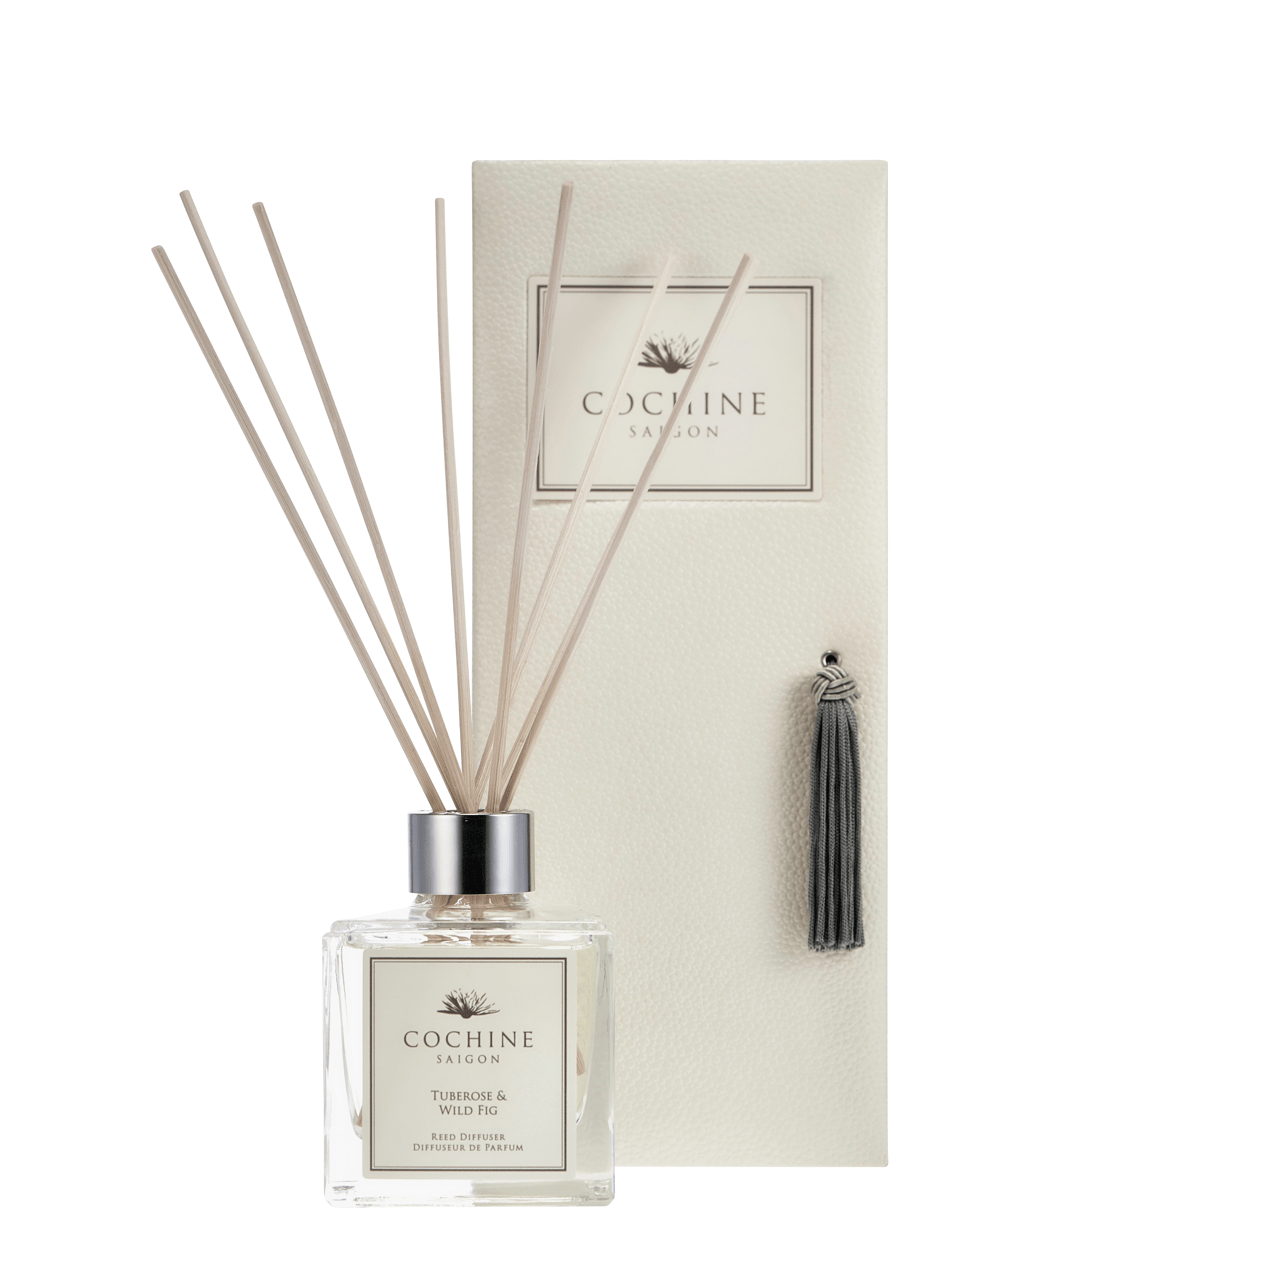 Cochine Home Fragrances of Cochines luxury scented candles and Cochine reed diffuers in Cochine Tuberose & Wild Fig Diffuser